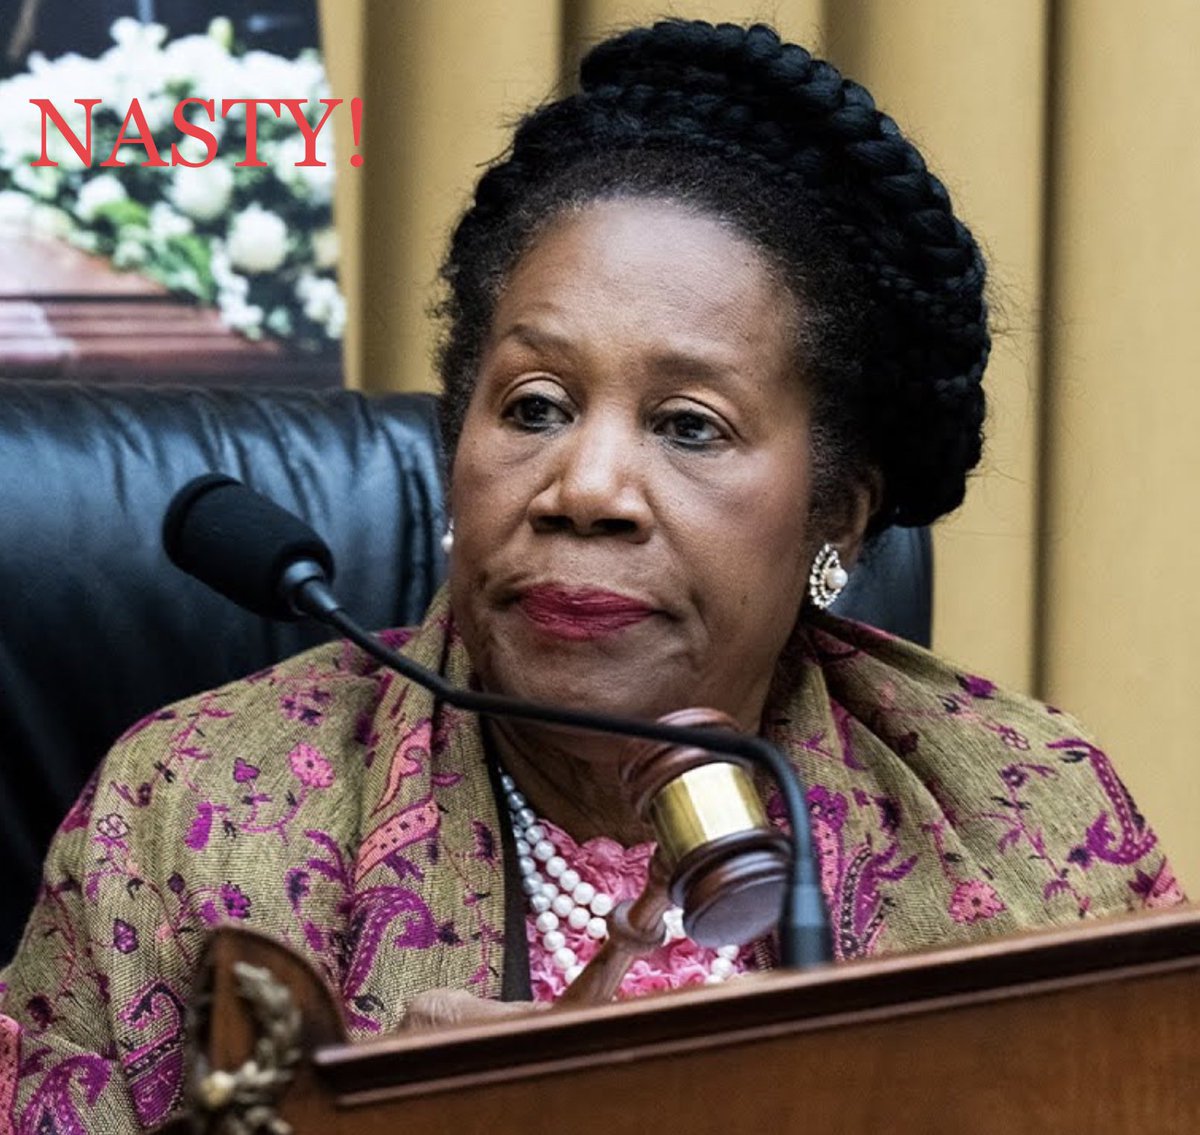 THIS! NOTHING TO SEE HERE FOLKS…👀🤬 Sheila Jackson Lee is a notorious bitch when it comes to how she treats her staff. What was it Joe said about demanding people treat others with respect…or be fired 🤔 Of course this is perfectly acceptable. 🤔 Just another example of bad…